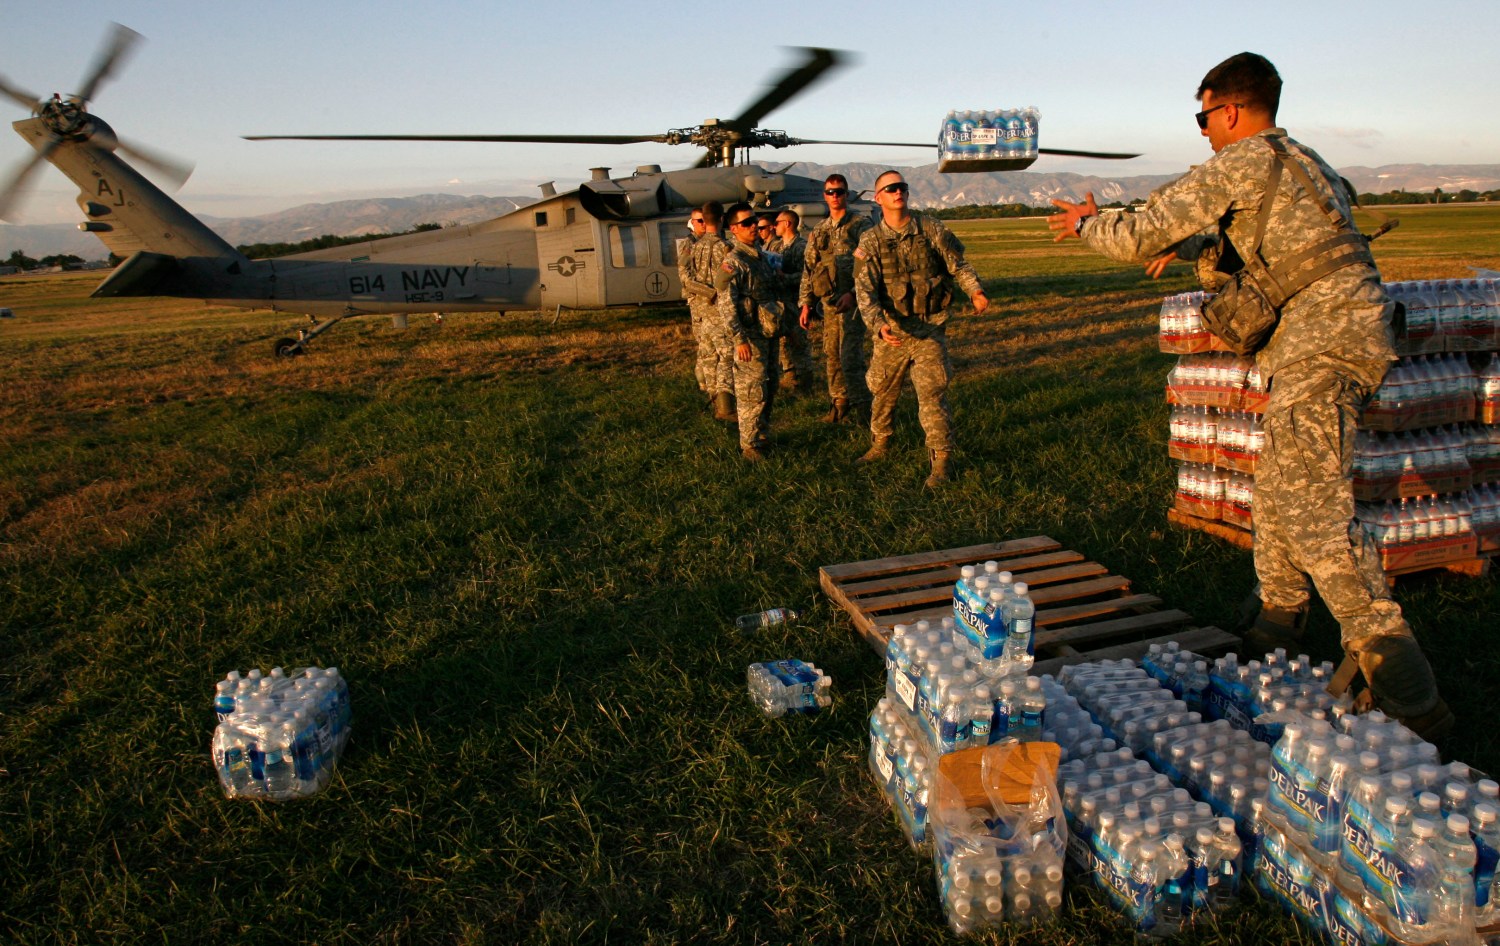 U.S. soldiers of the 82nd Airborne help load water onto a Navy helicopter at a staging area at Port-au-Prince international airport January 17, 2010. Relief efforts continue in the island nation's capital after last week's devastating earthquake. U.S. troops will help U.N. peacekeepers keep order on Haiti's increasingly lawless streets, the country's president said on Sunday as aid workers struggled to get food and medical assistance to desperate earthquake survivors.      REUTERS/Hans Deryk    (HAITI - Tags: DISASTER MILITARY) - GM1E61I0YZK01